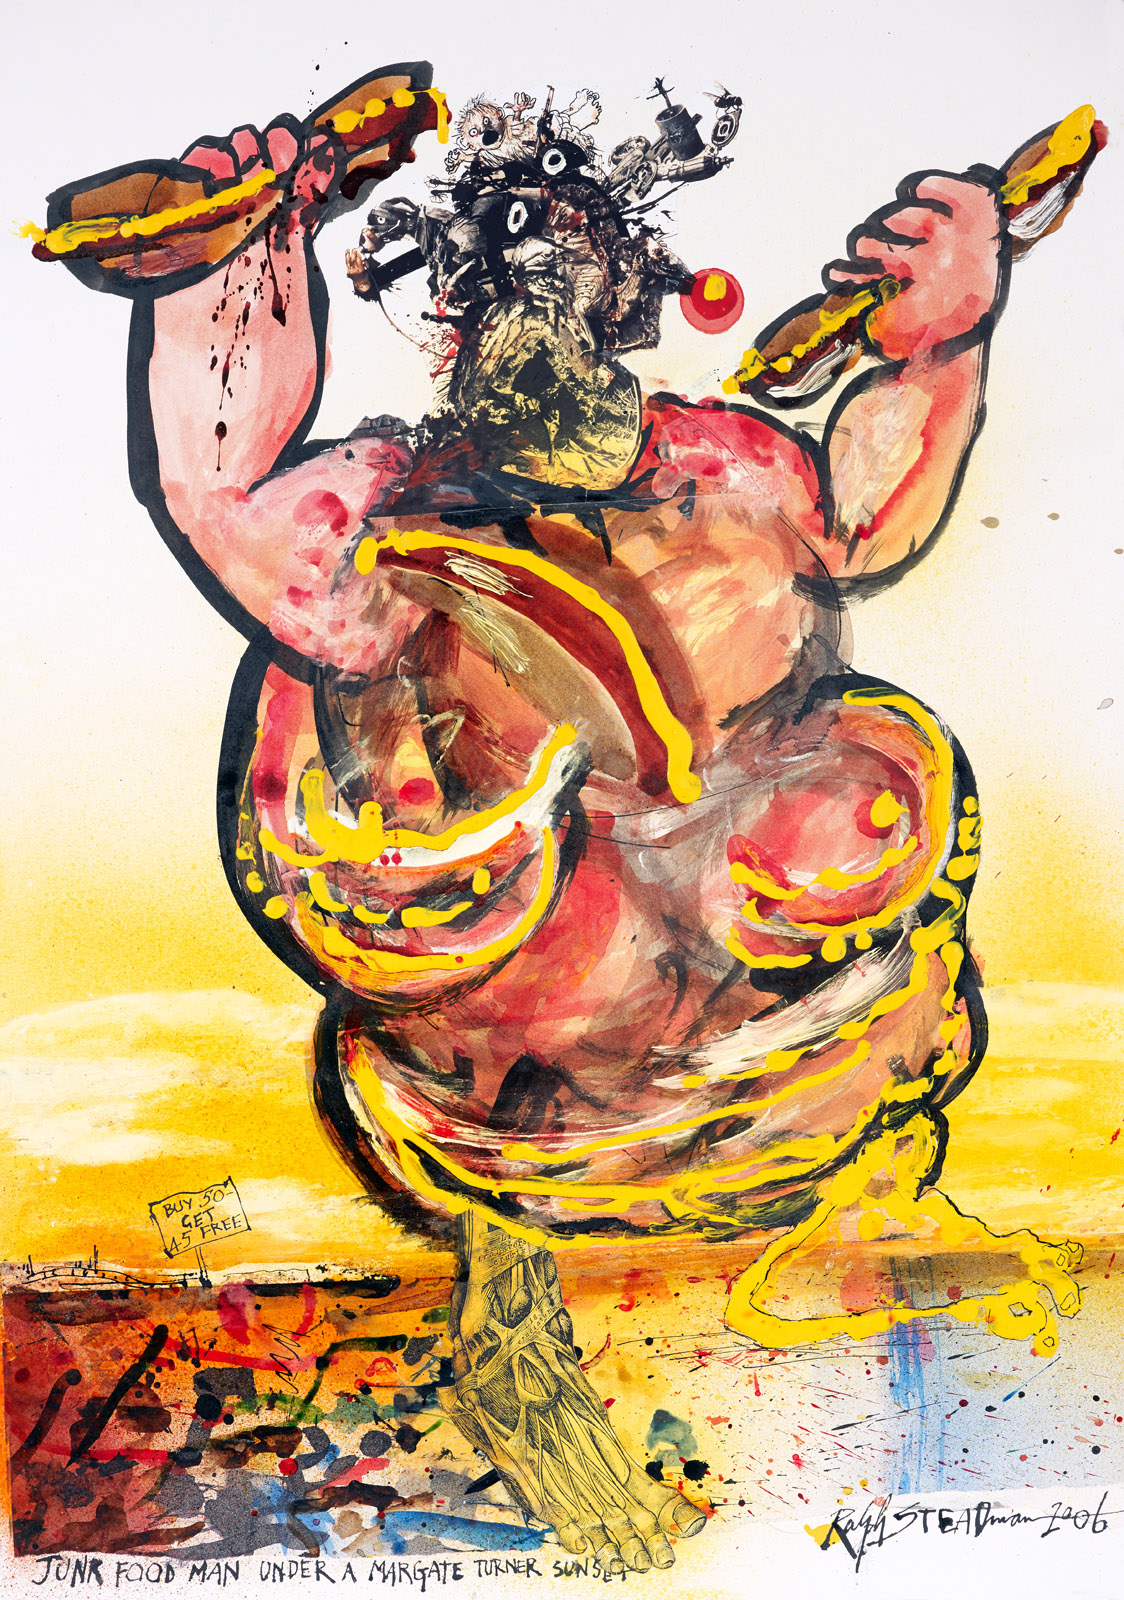 Ralph Steadman's collaboration with Will Self